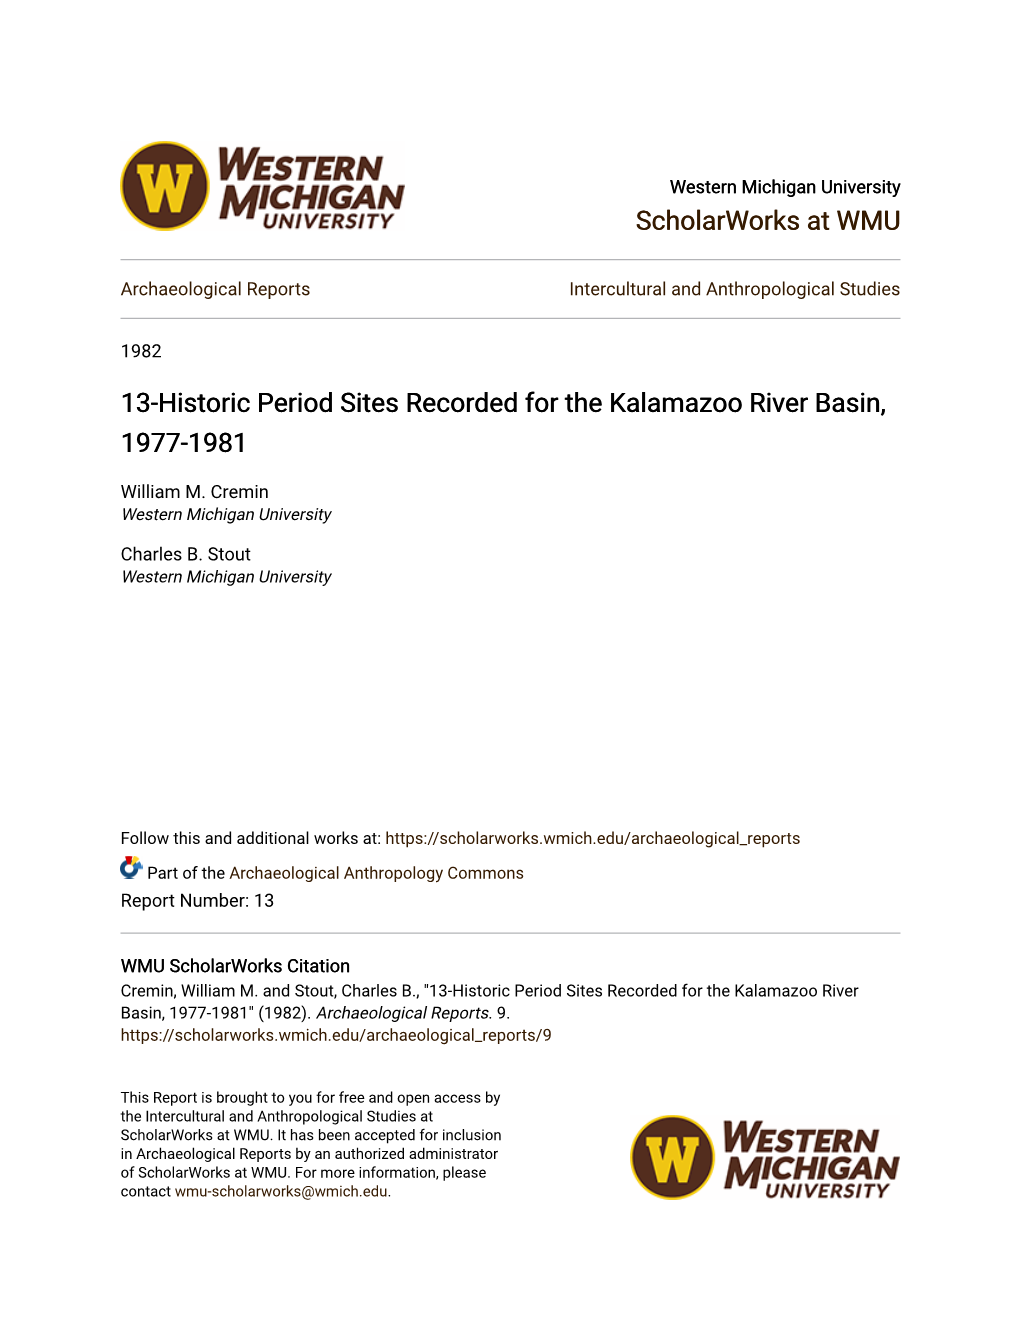 13-Historic Period Sites Recorded for the Kalamazoo River Basin, 1977-1981